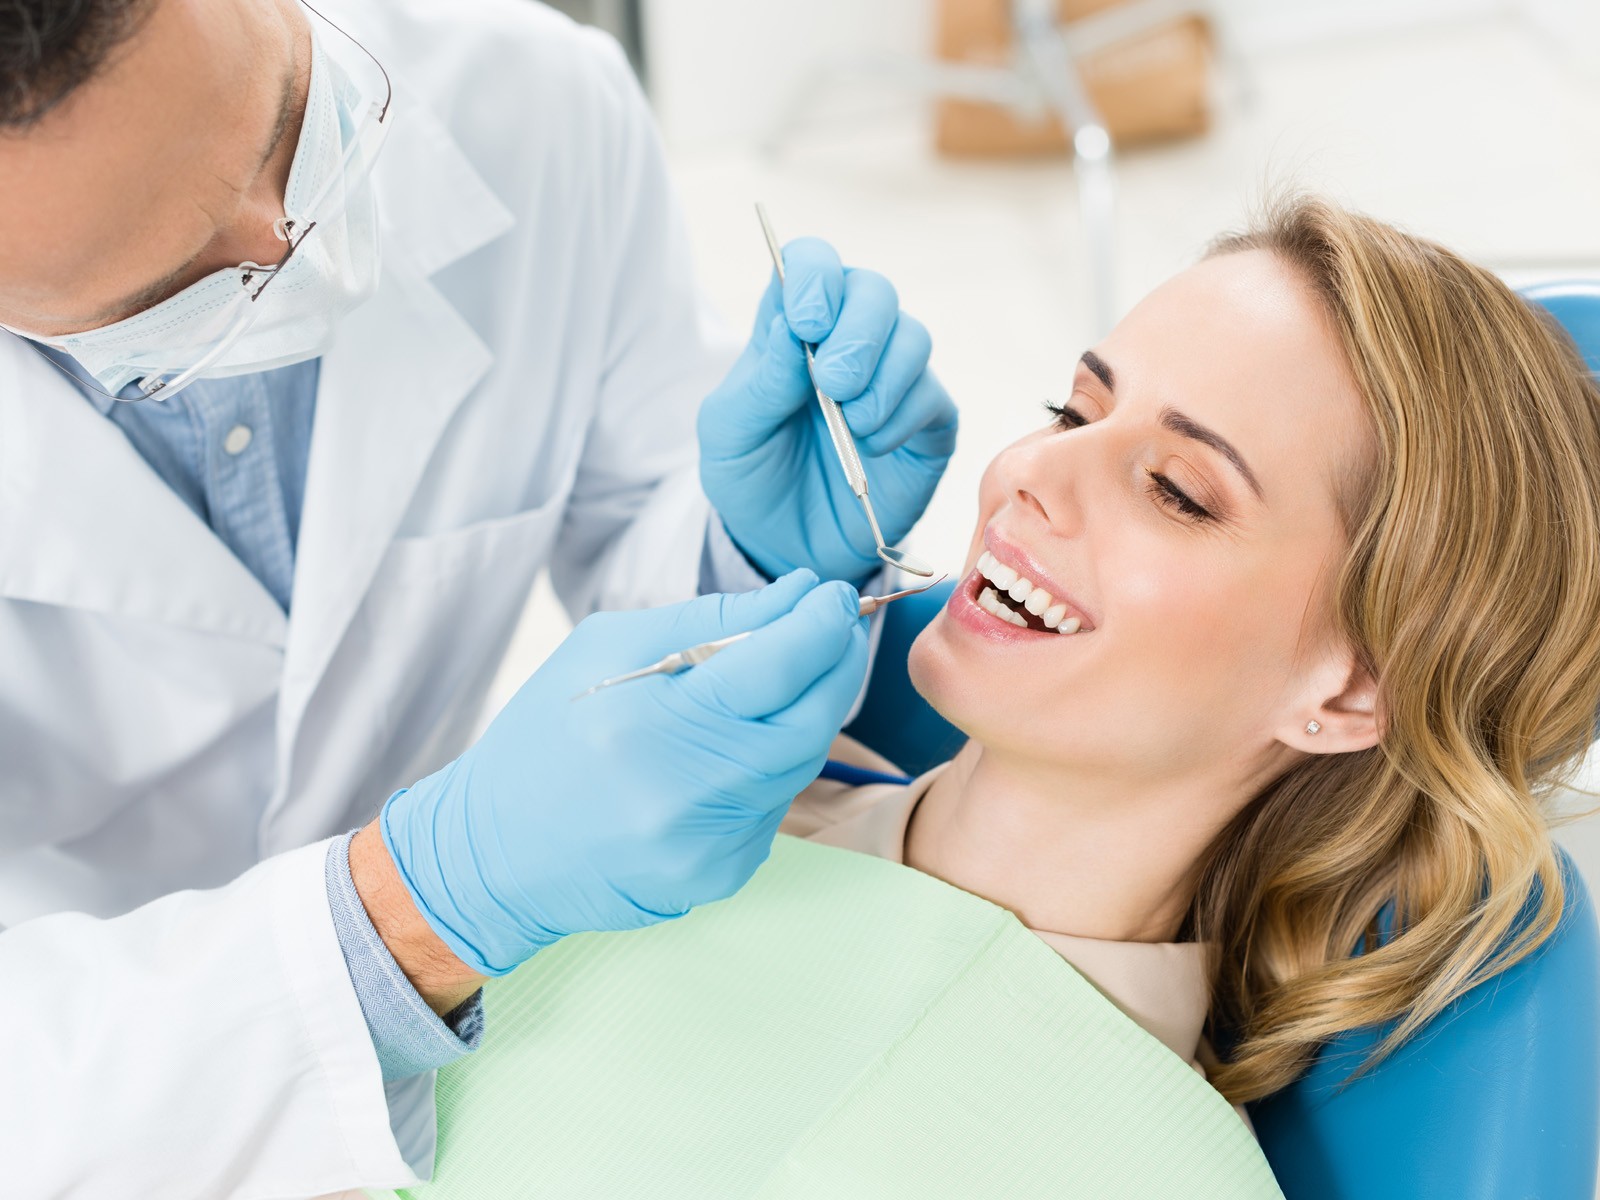 How painful is root canal treatment?